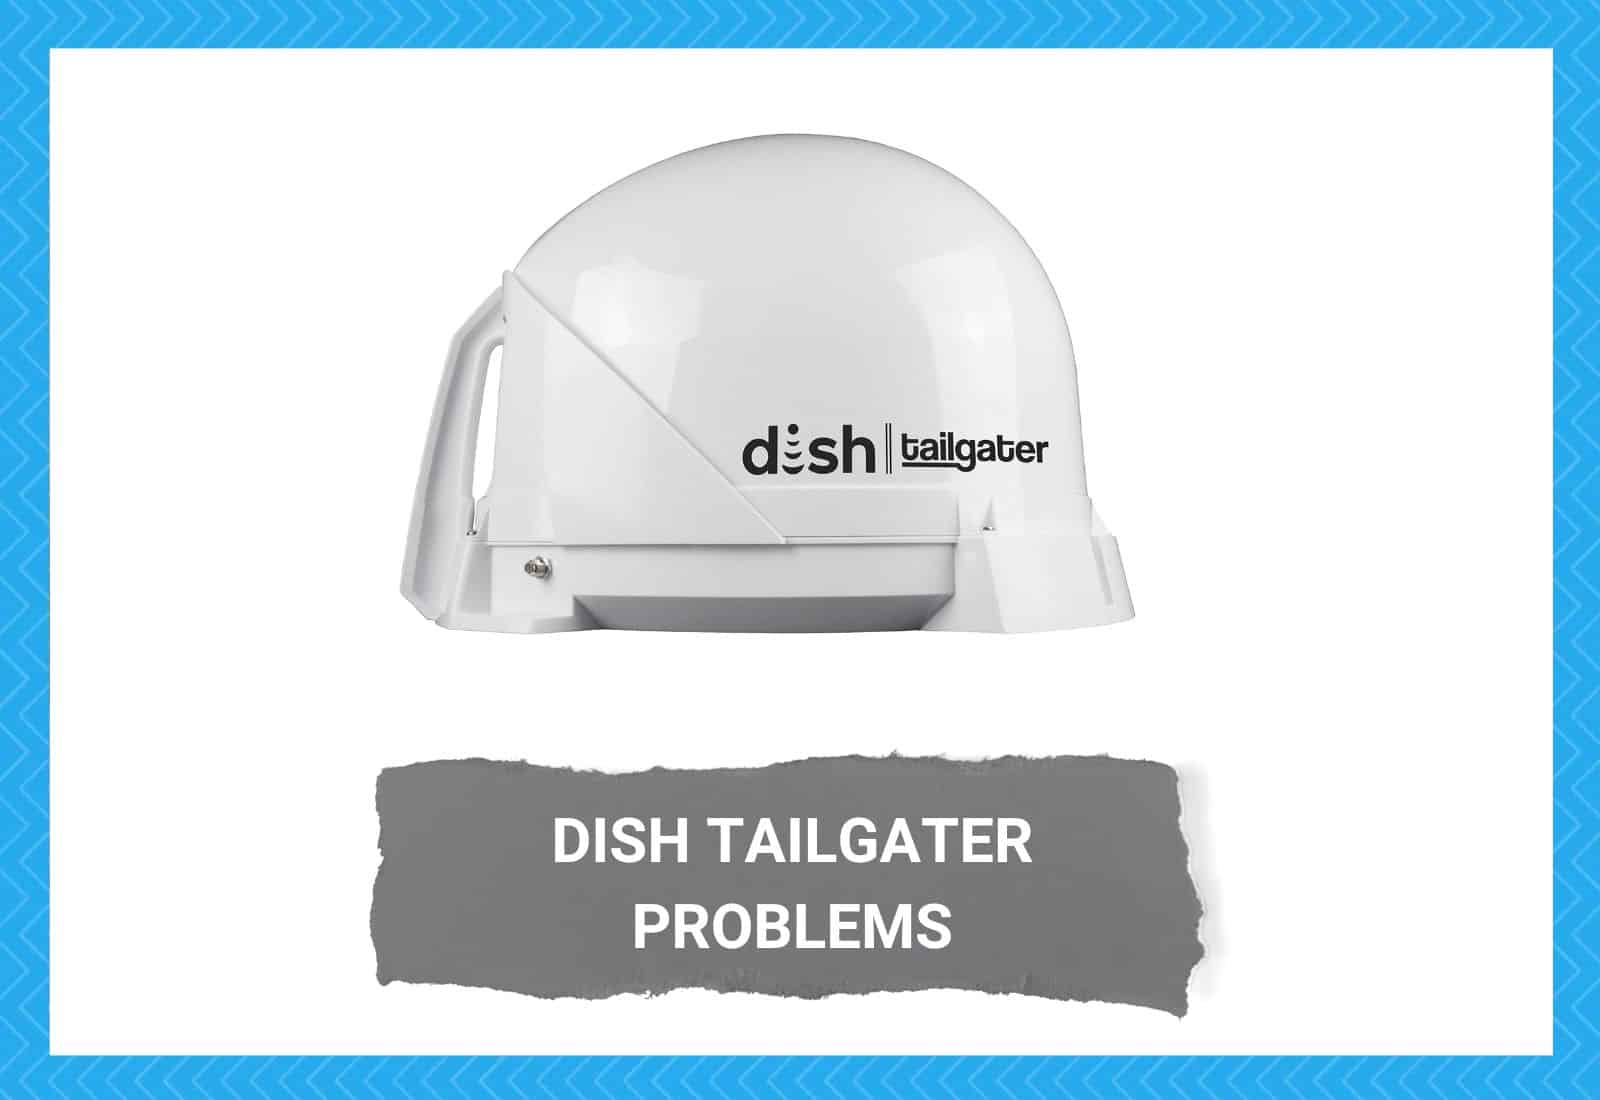 Dish Tailgater Problems